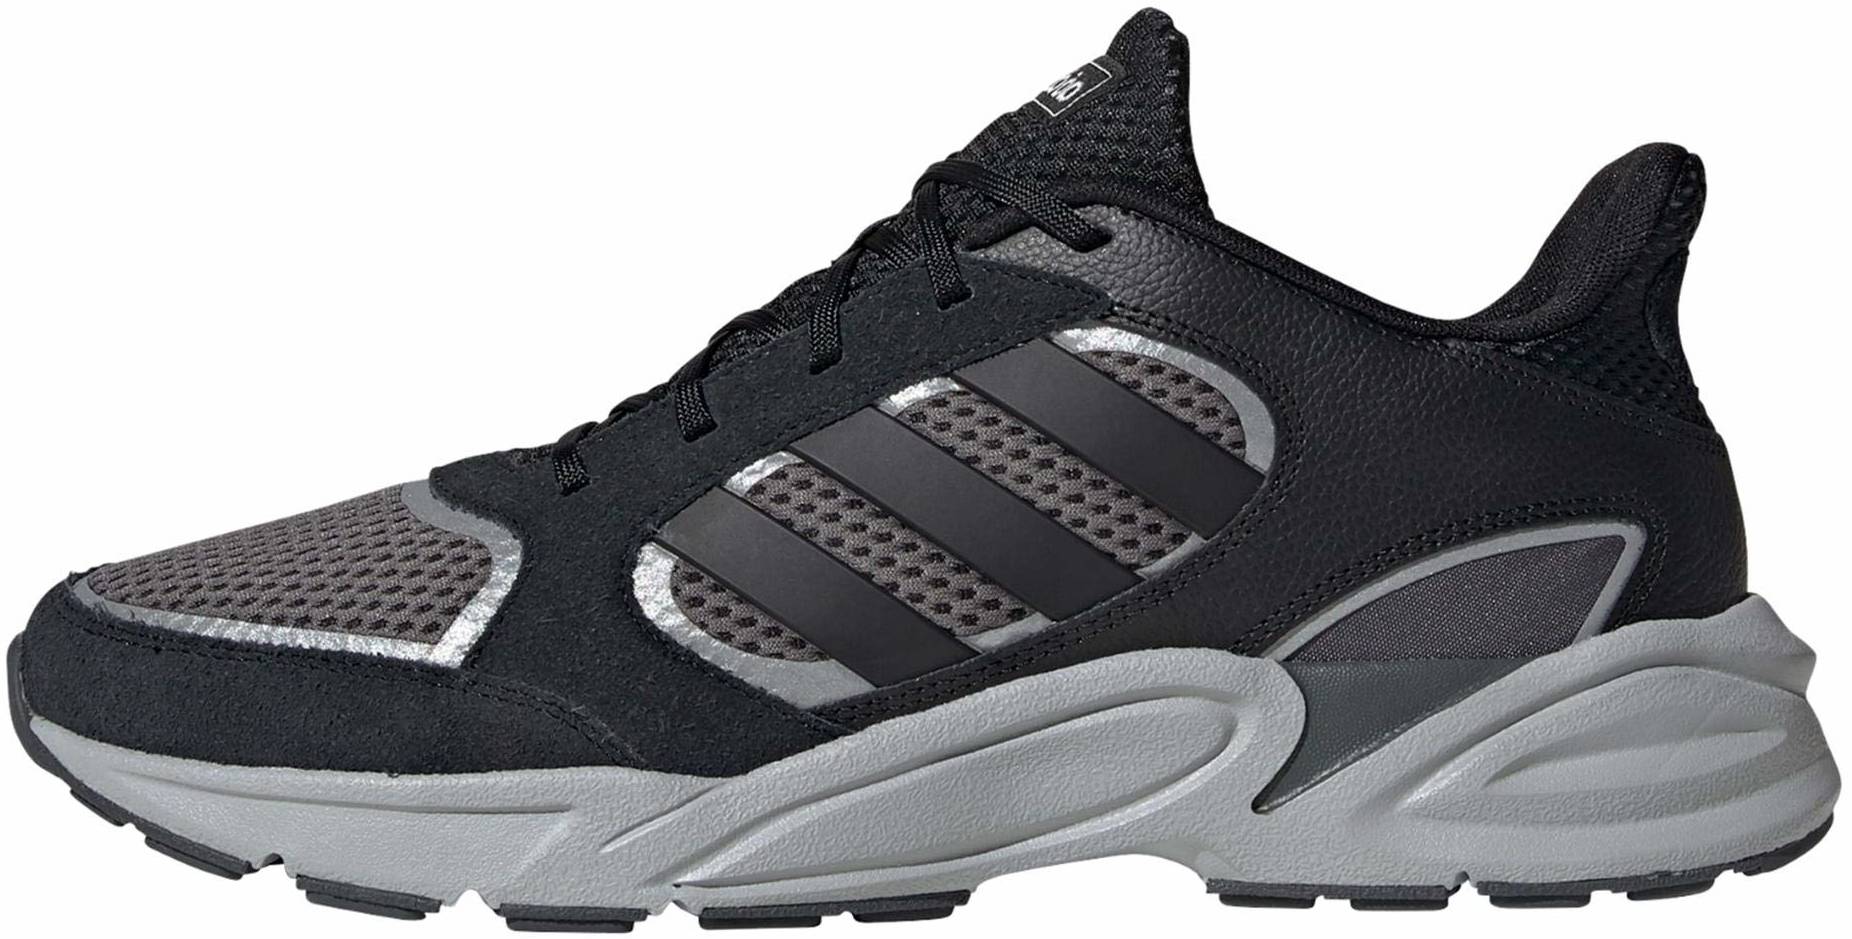 adidas 90s shoes 2016